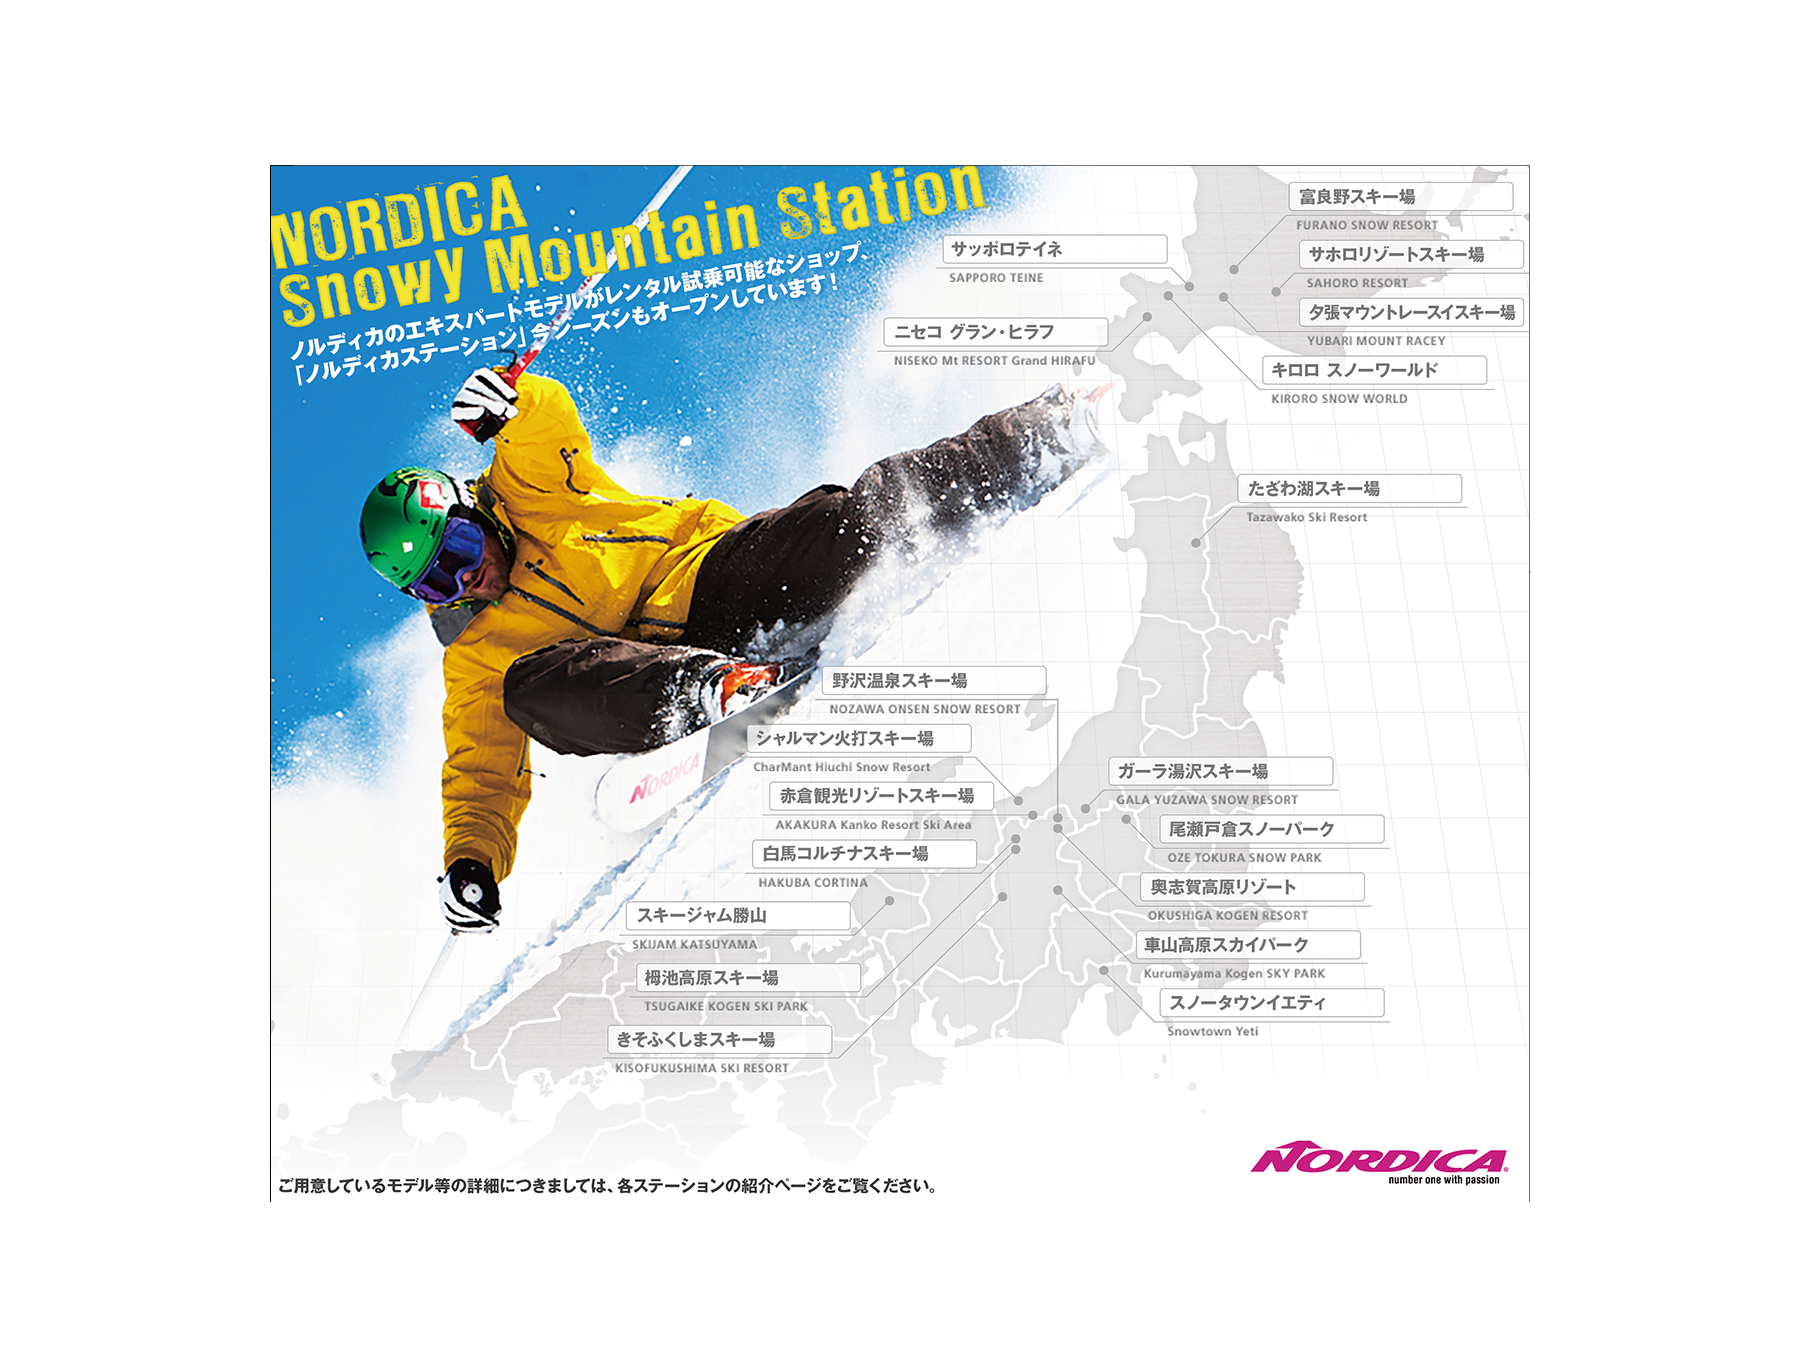 NORDICA Snowy Mountain Station WEB